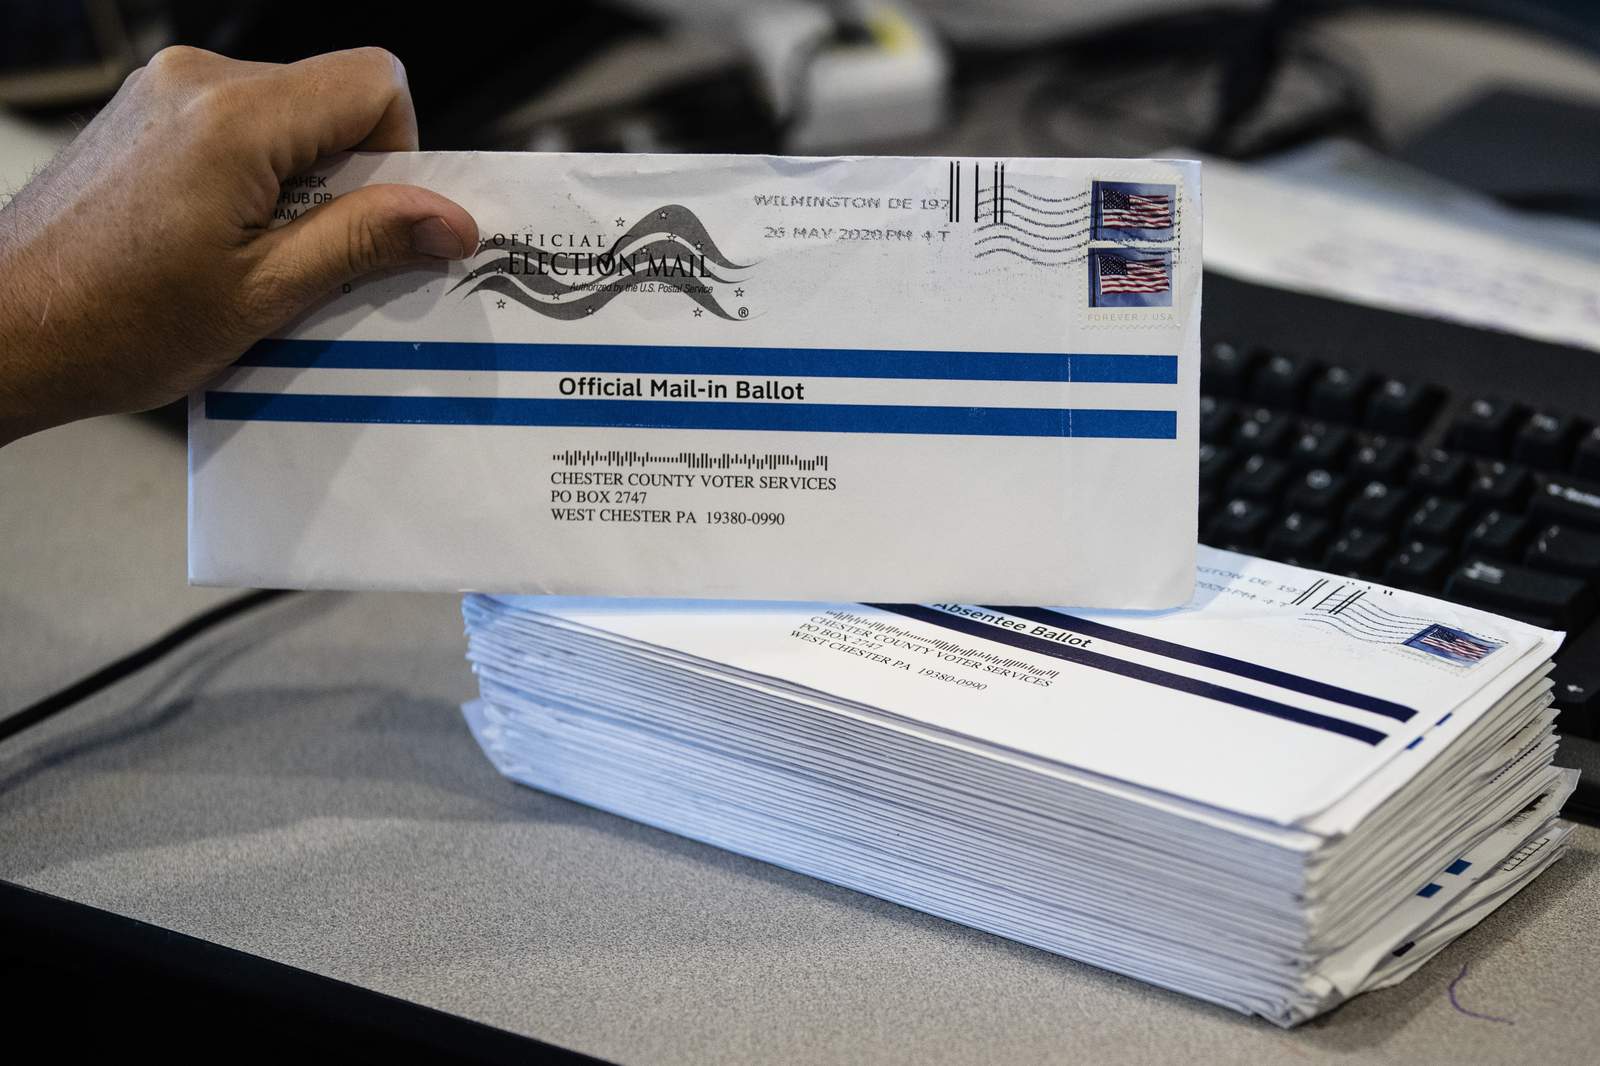 Post Office warns states across US about mail voting